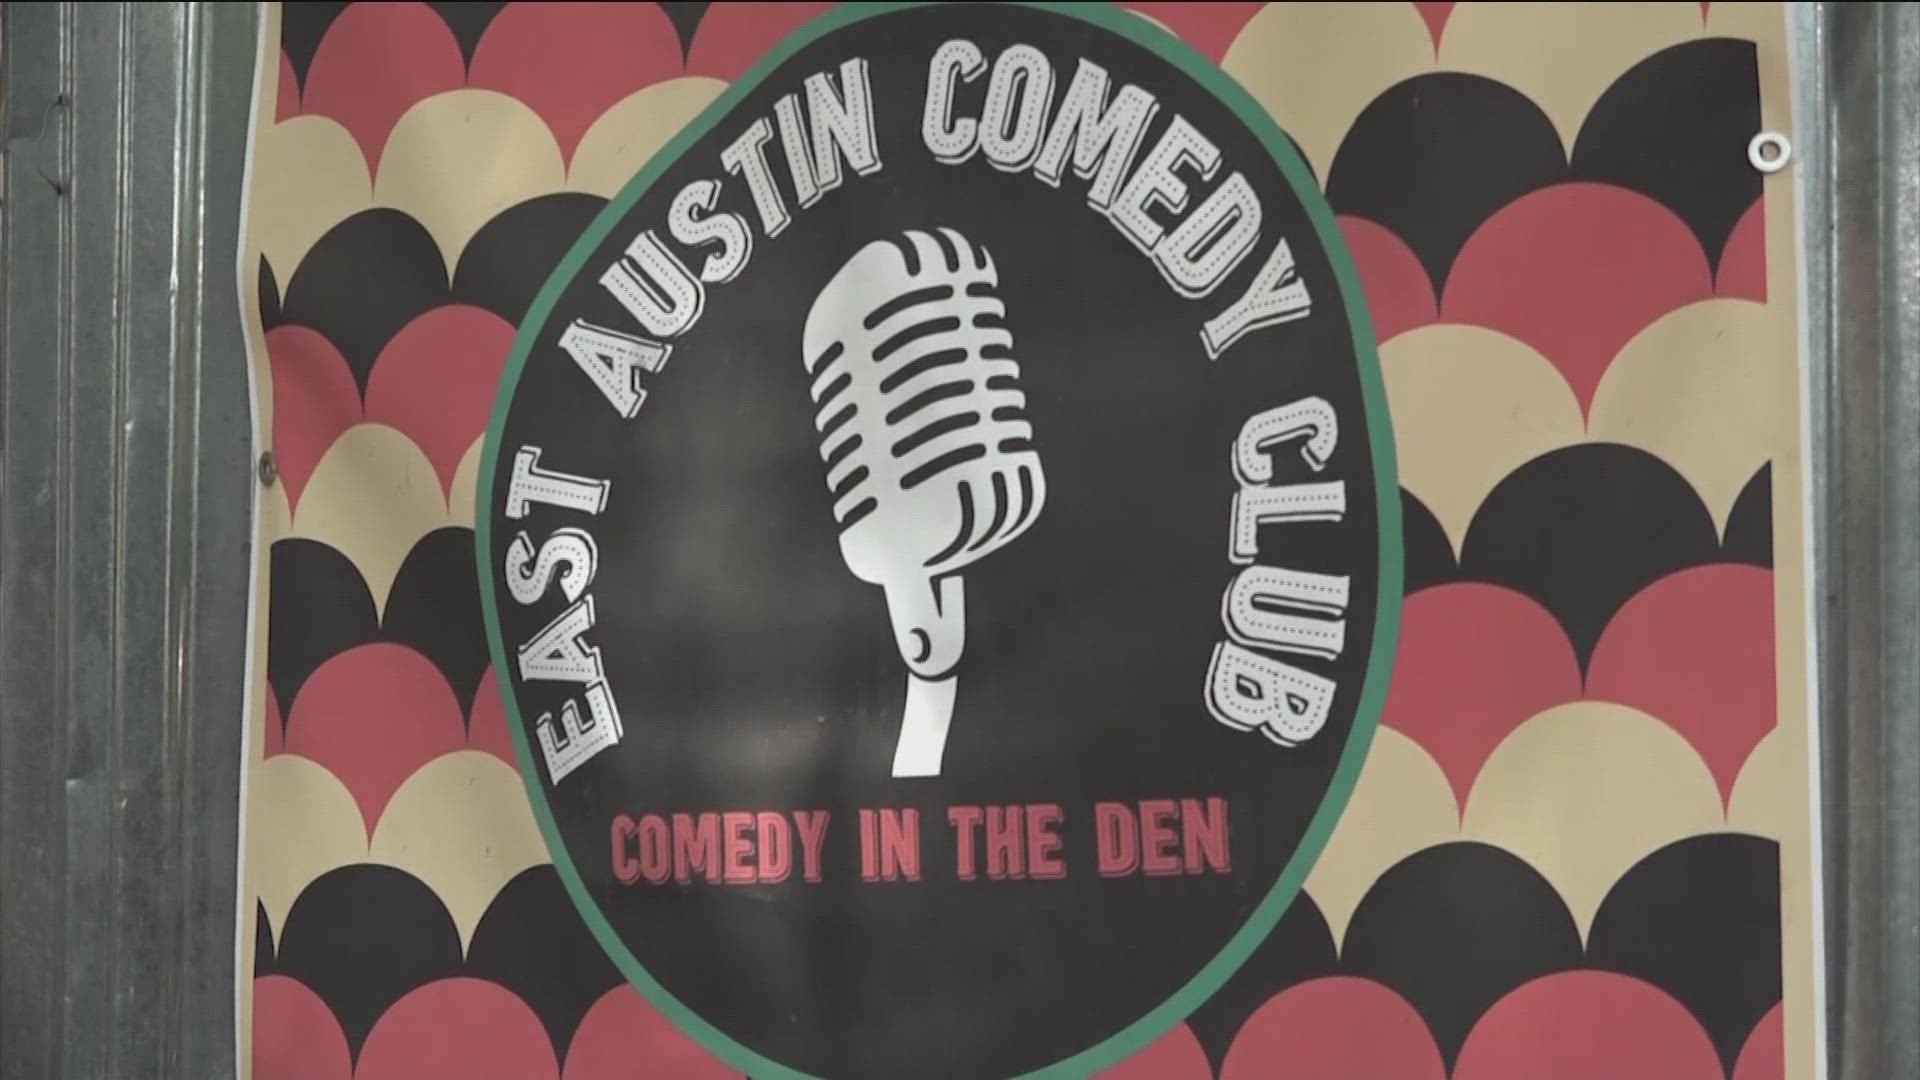 Founded by local comedians, Austin’s historic Tiger Den has been transformed into East Austin’s newest destination for laughs.